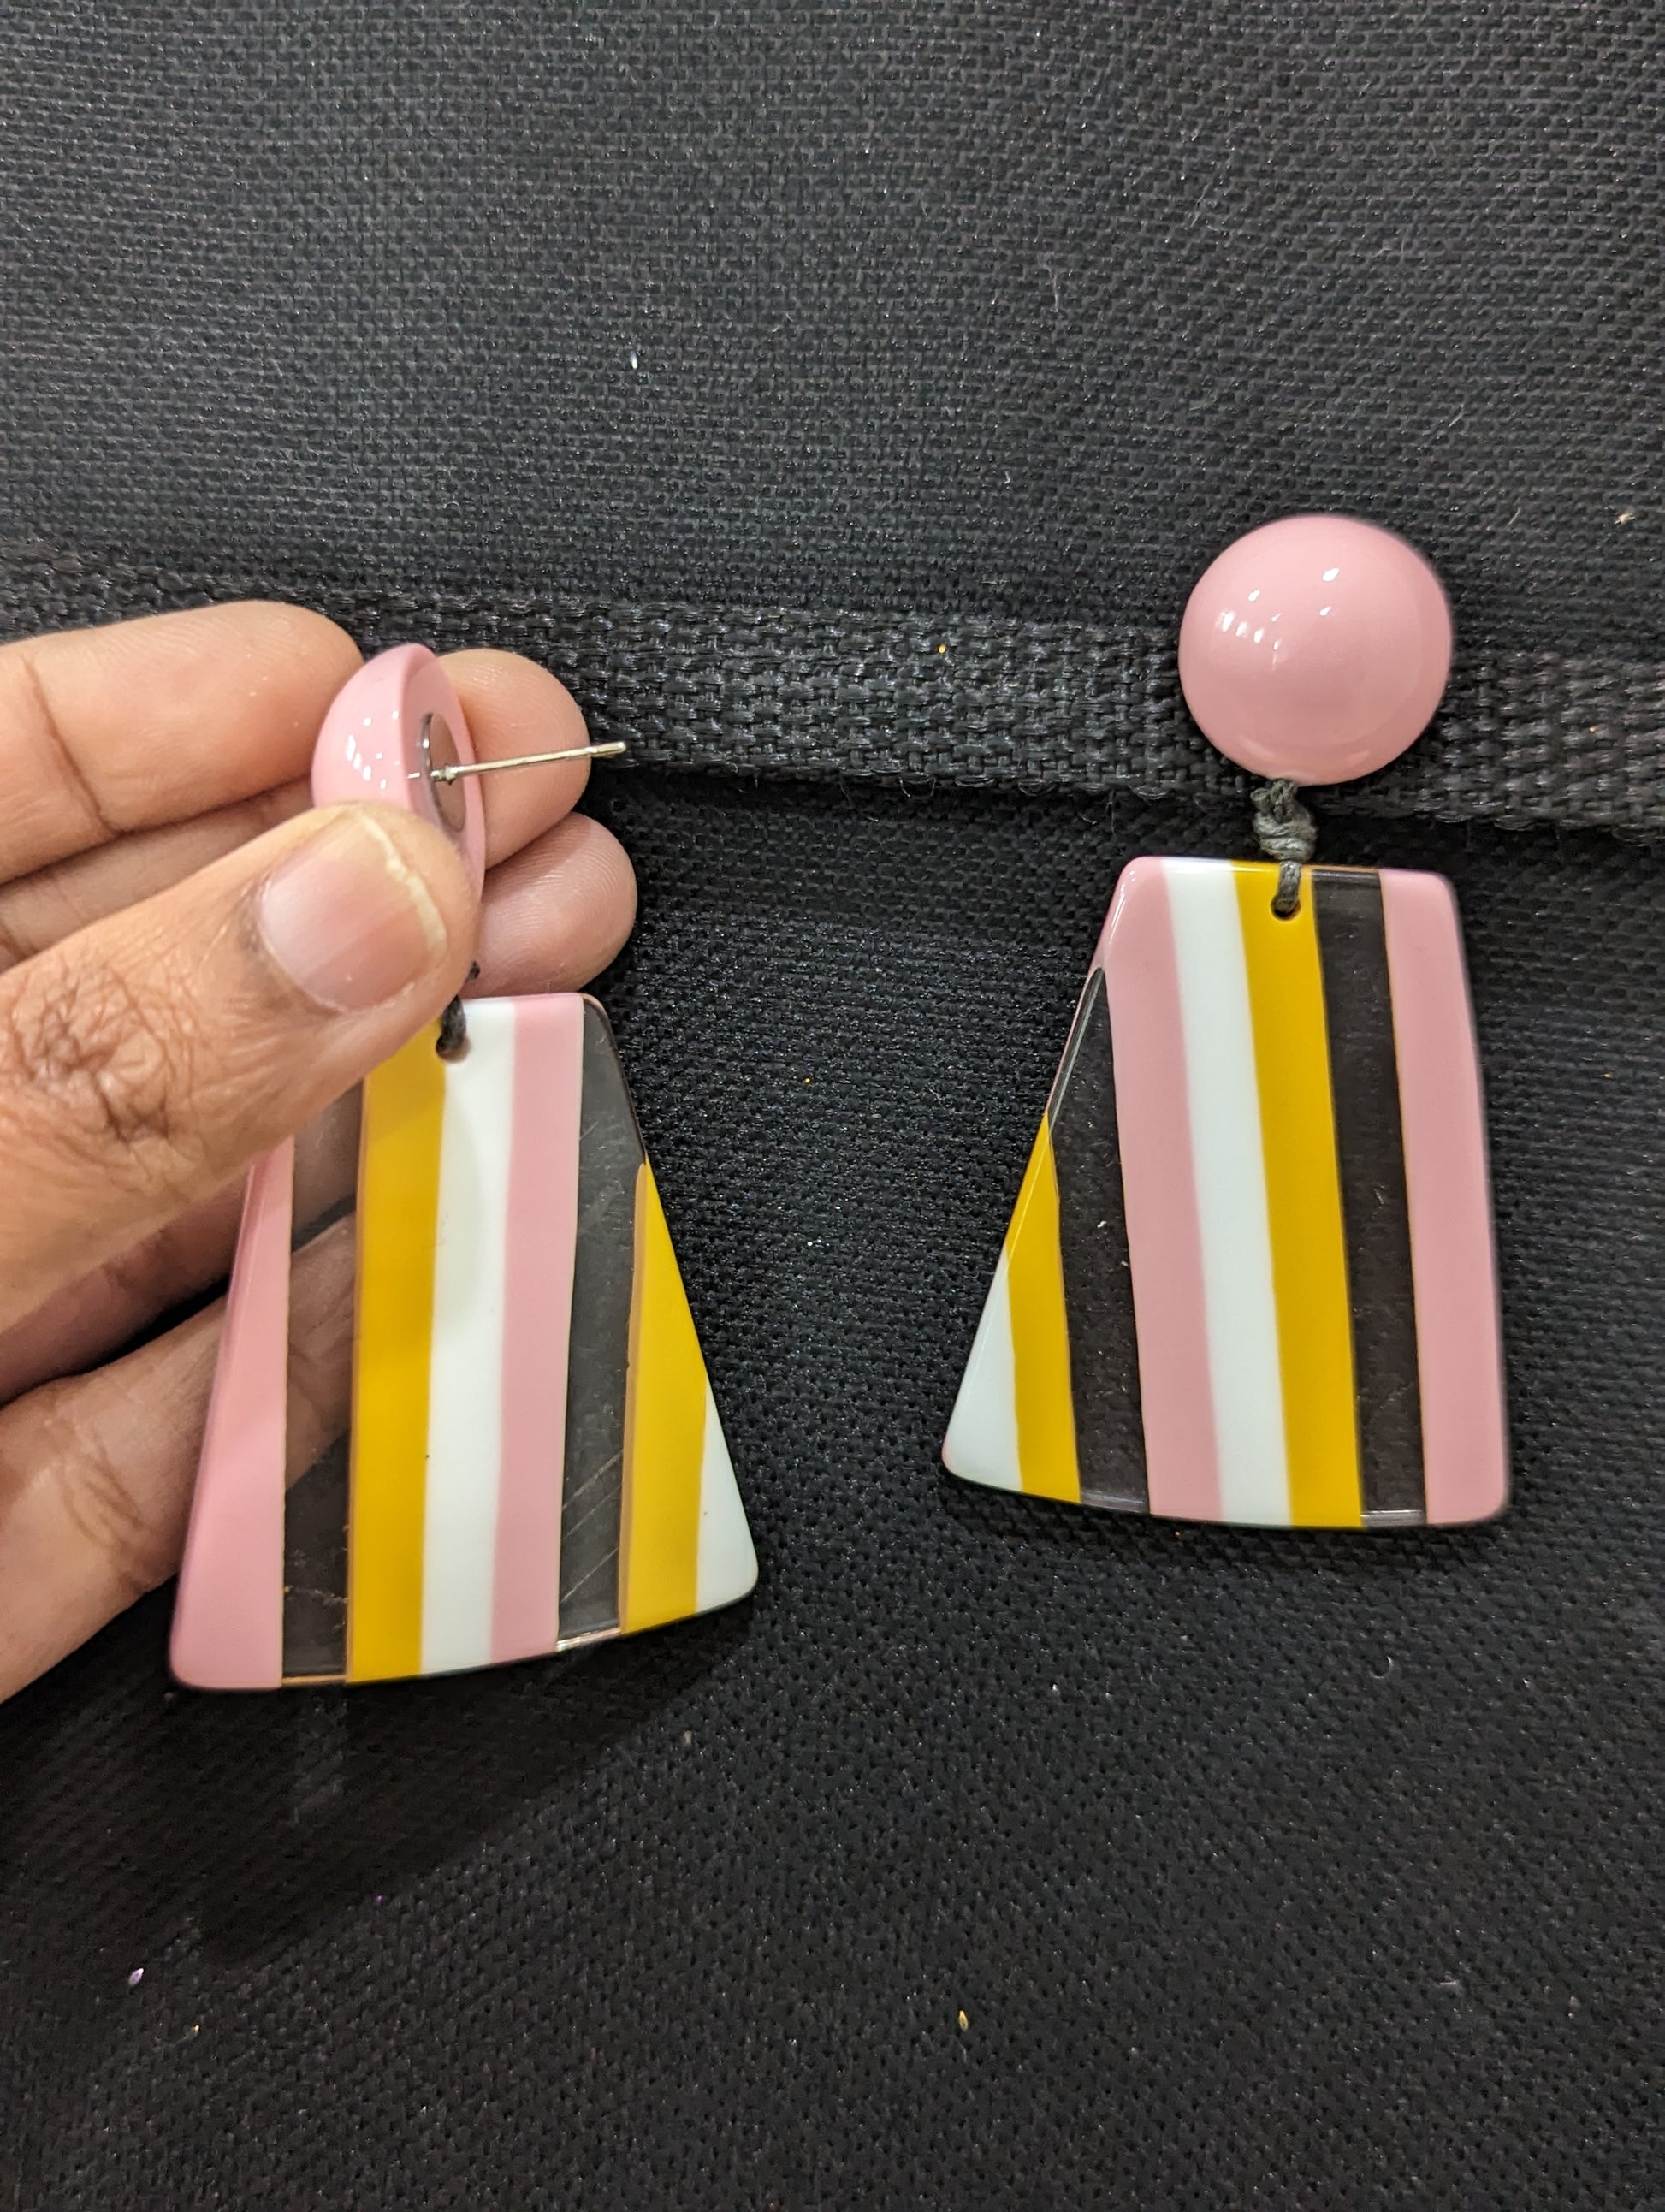 Vertical lined colorful plastic earrings – Simpliful Jewelry